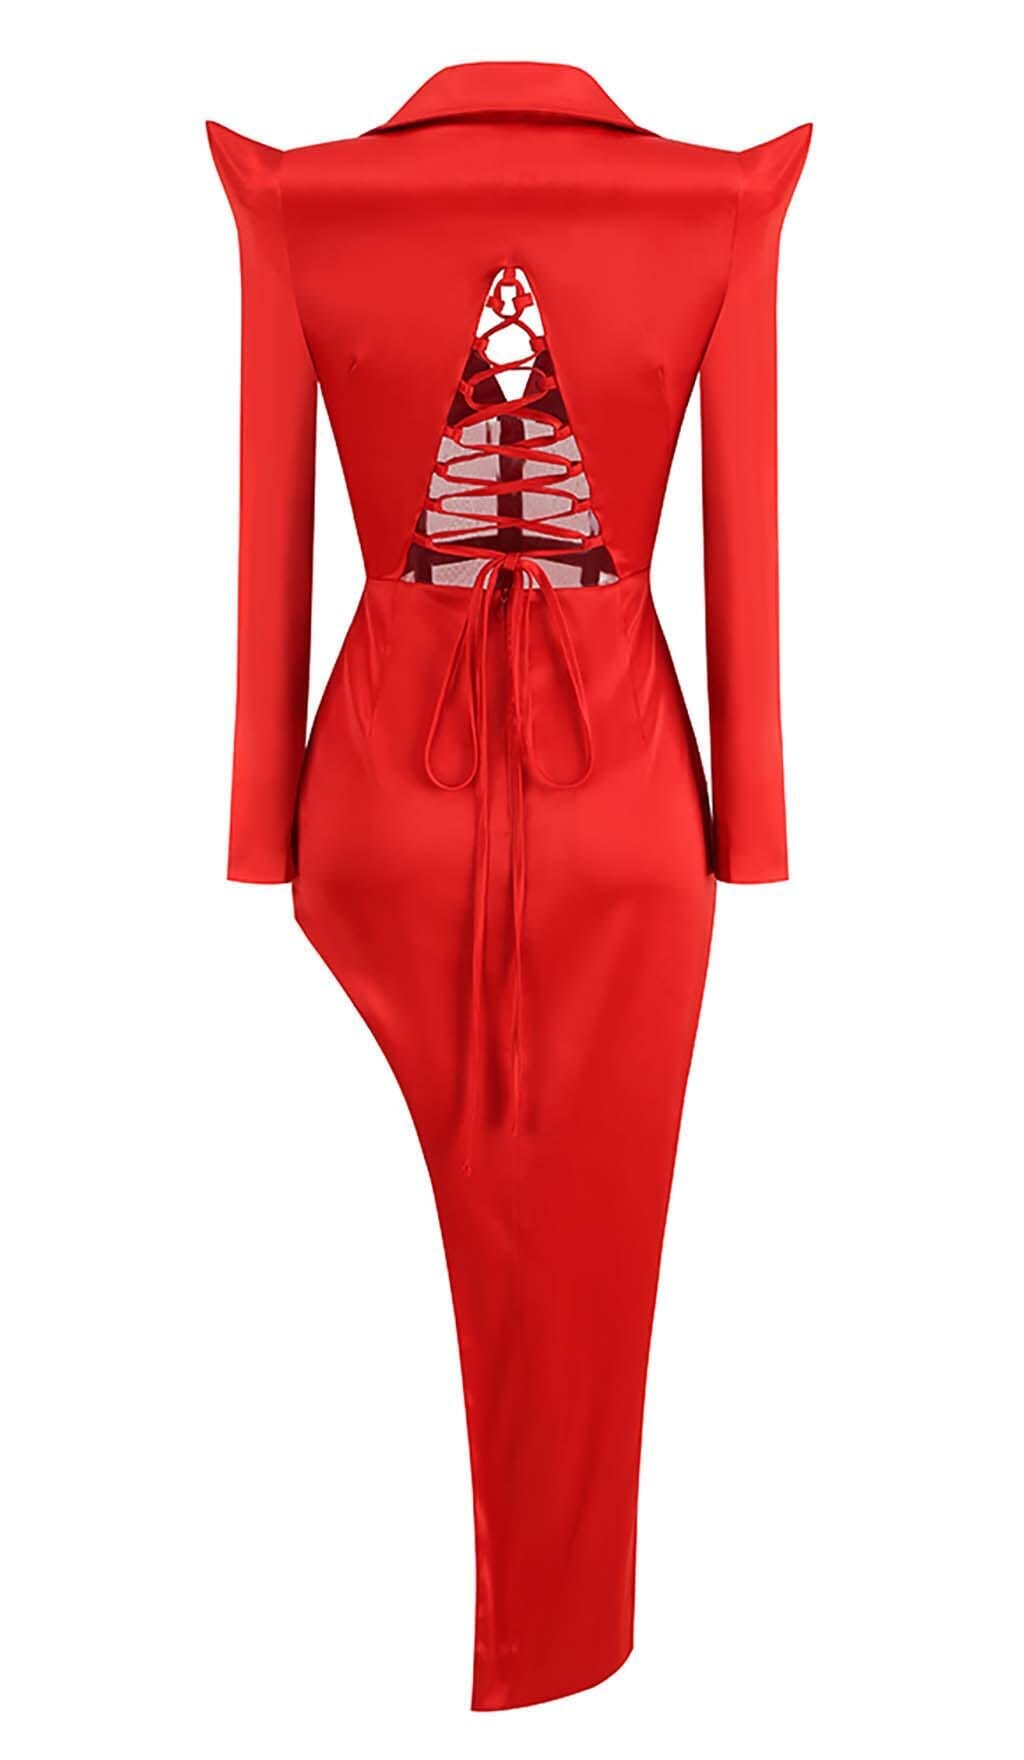 CORSET PLUNGE JACKET DRESS IN RED